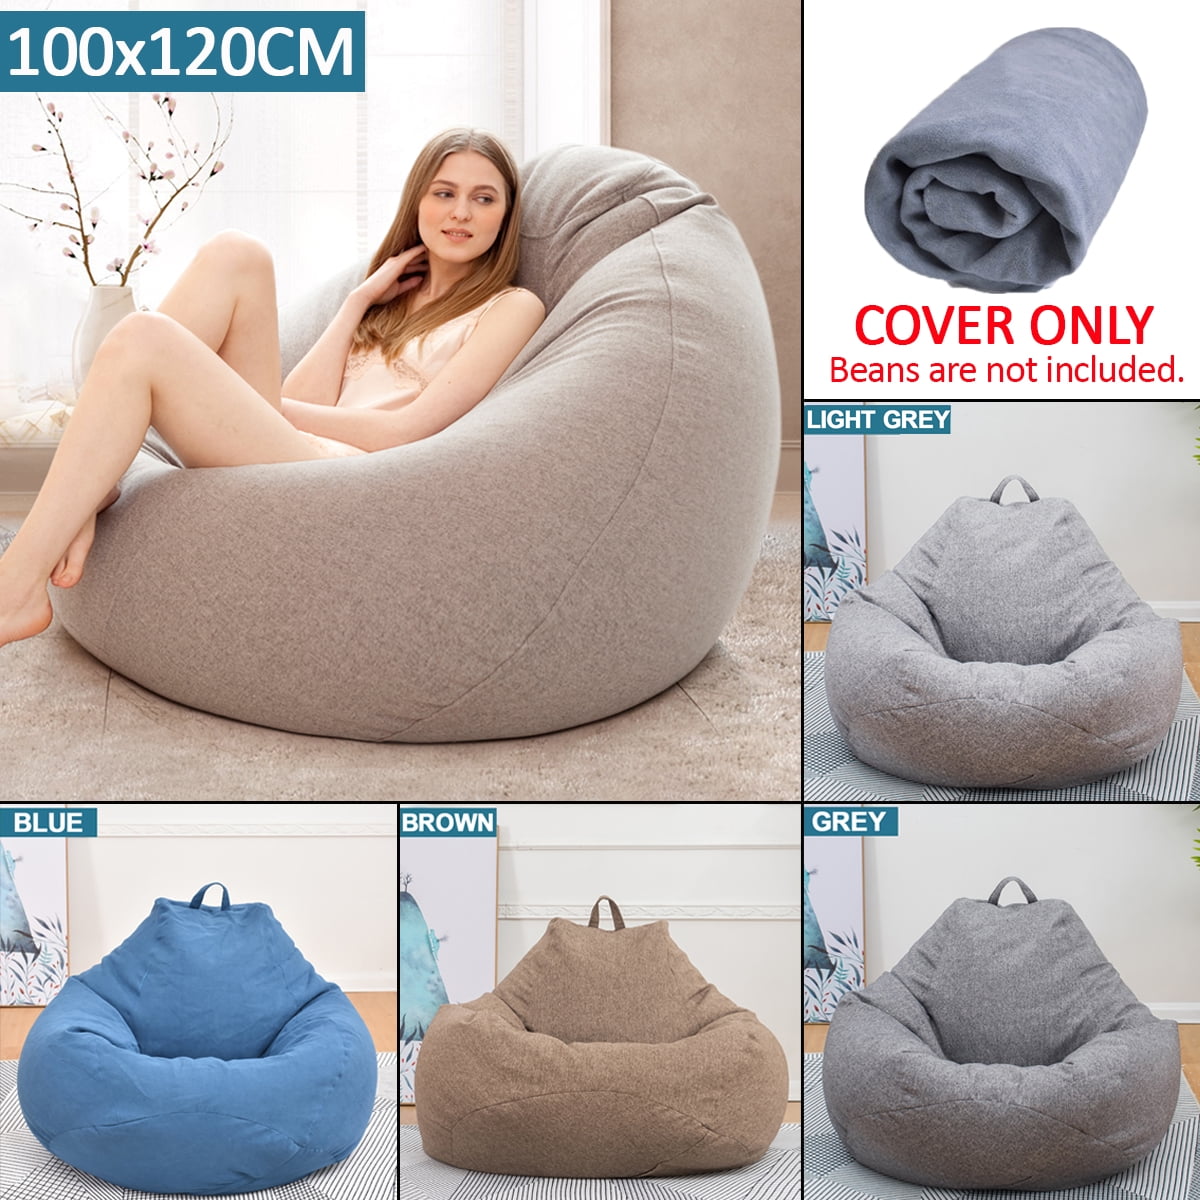 Dizziness Dare Illusion 39'' x 47'' Extra Large Bean Bag Chair Sofa Cover Indoor/Outdoor Game Seat  BeanBag Adults Kid (No Filling) - Walmart.com